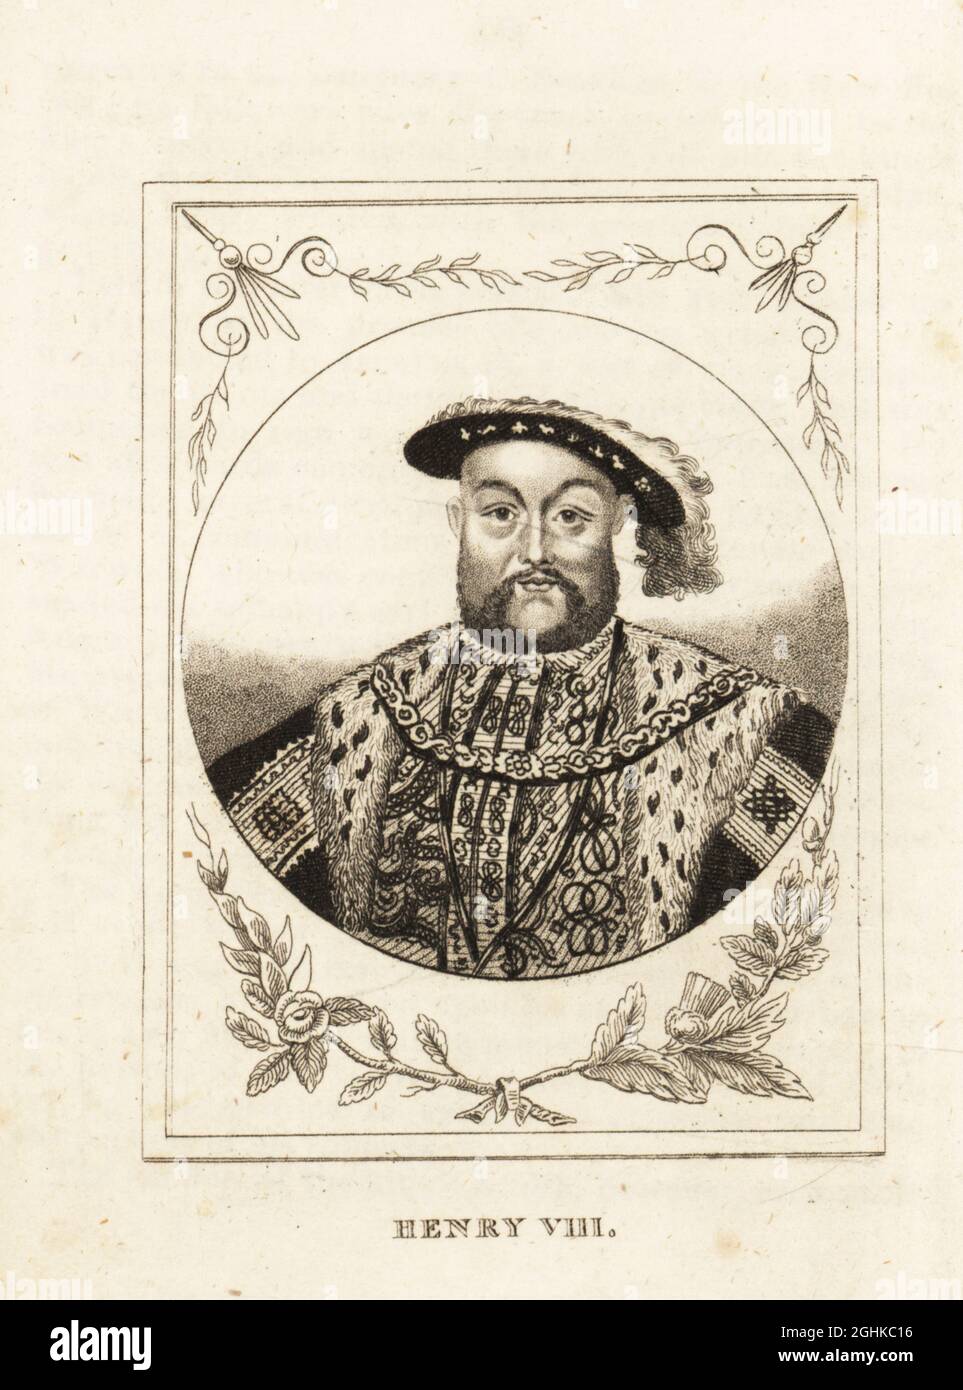 Portrait of King Henry VIII of England, 1491-1547. Copperplate engraving after Hans Holbein from M. A. Jones’ History of England from Julius Caesar to George IV, G. Virtue, 26 Ivy Lane, London, 1836. Stock Photo